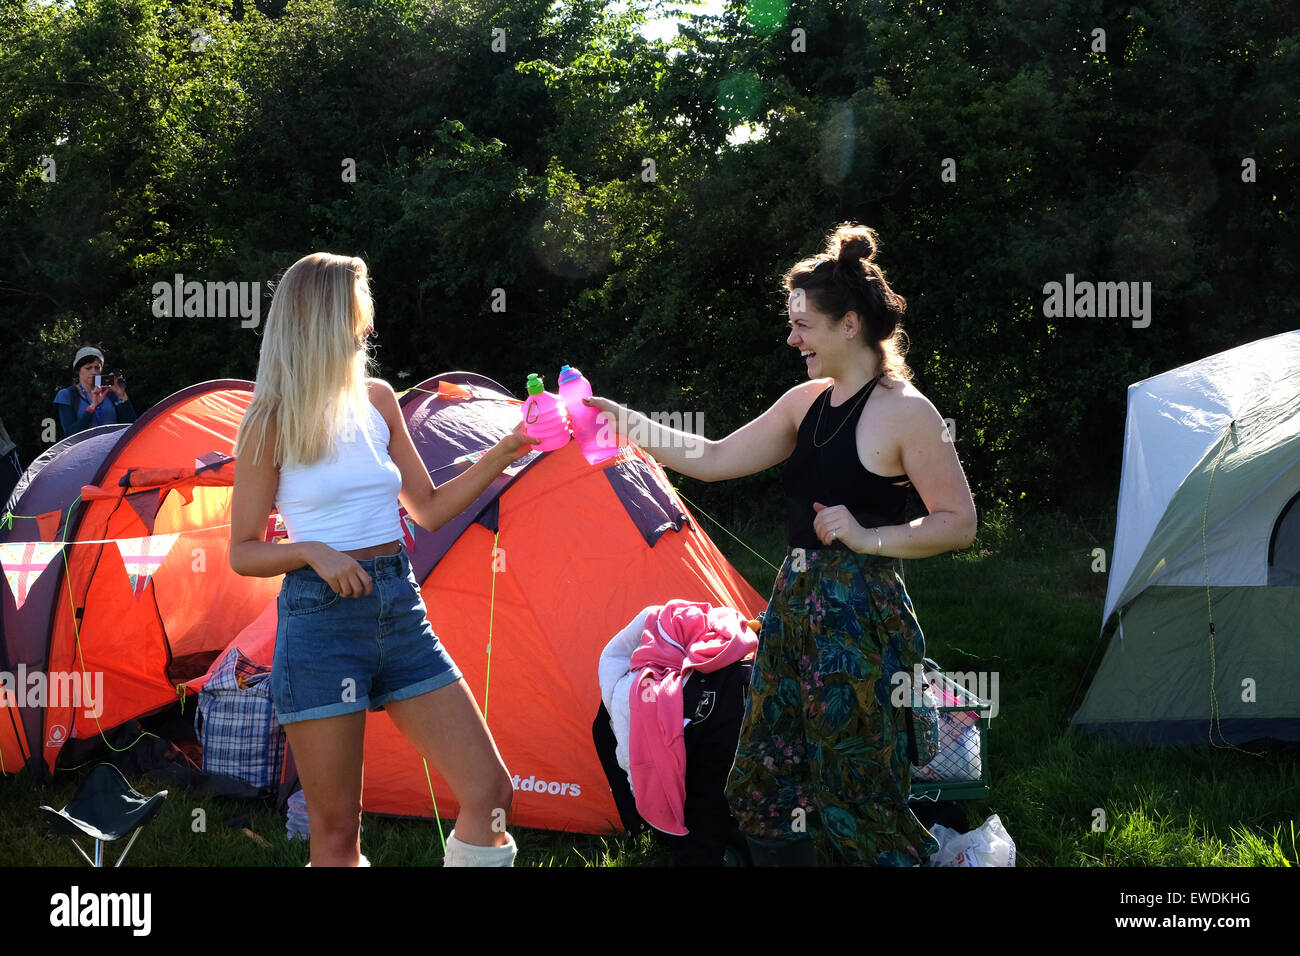 Glastonbury Festival, Somerset, UK. 24 June 2015. As the gates open for the 2015 Glastonbury Festival crowds swarm into the site carrying camping equipment and supplies to set up camp for the duration. Credit:  Tom Corban/Alamy Live News Stock Photo